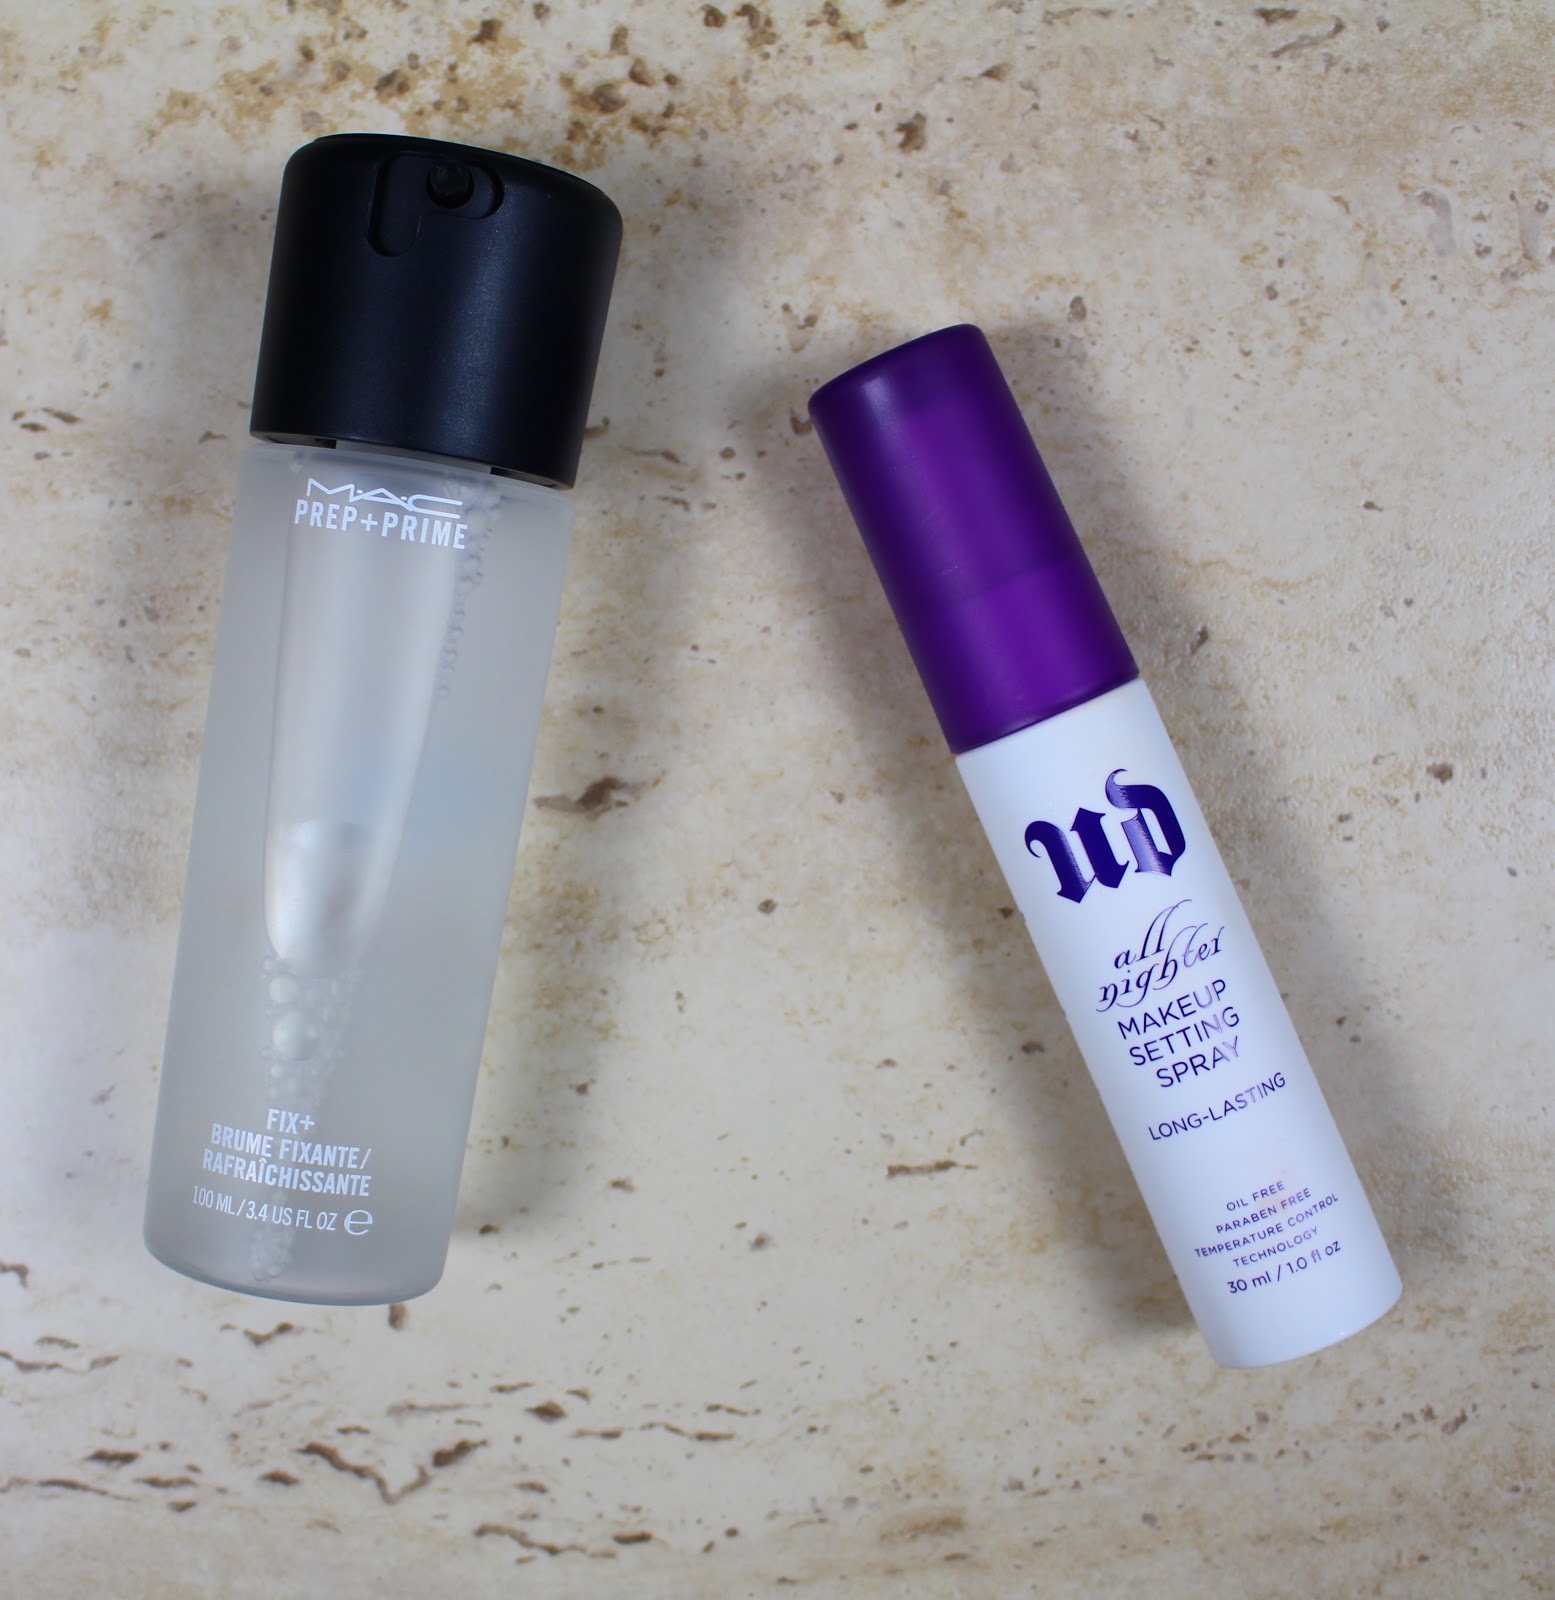 A lightweight water mist that gently soothes and refreshes skin and finishes makeup.